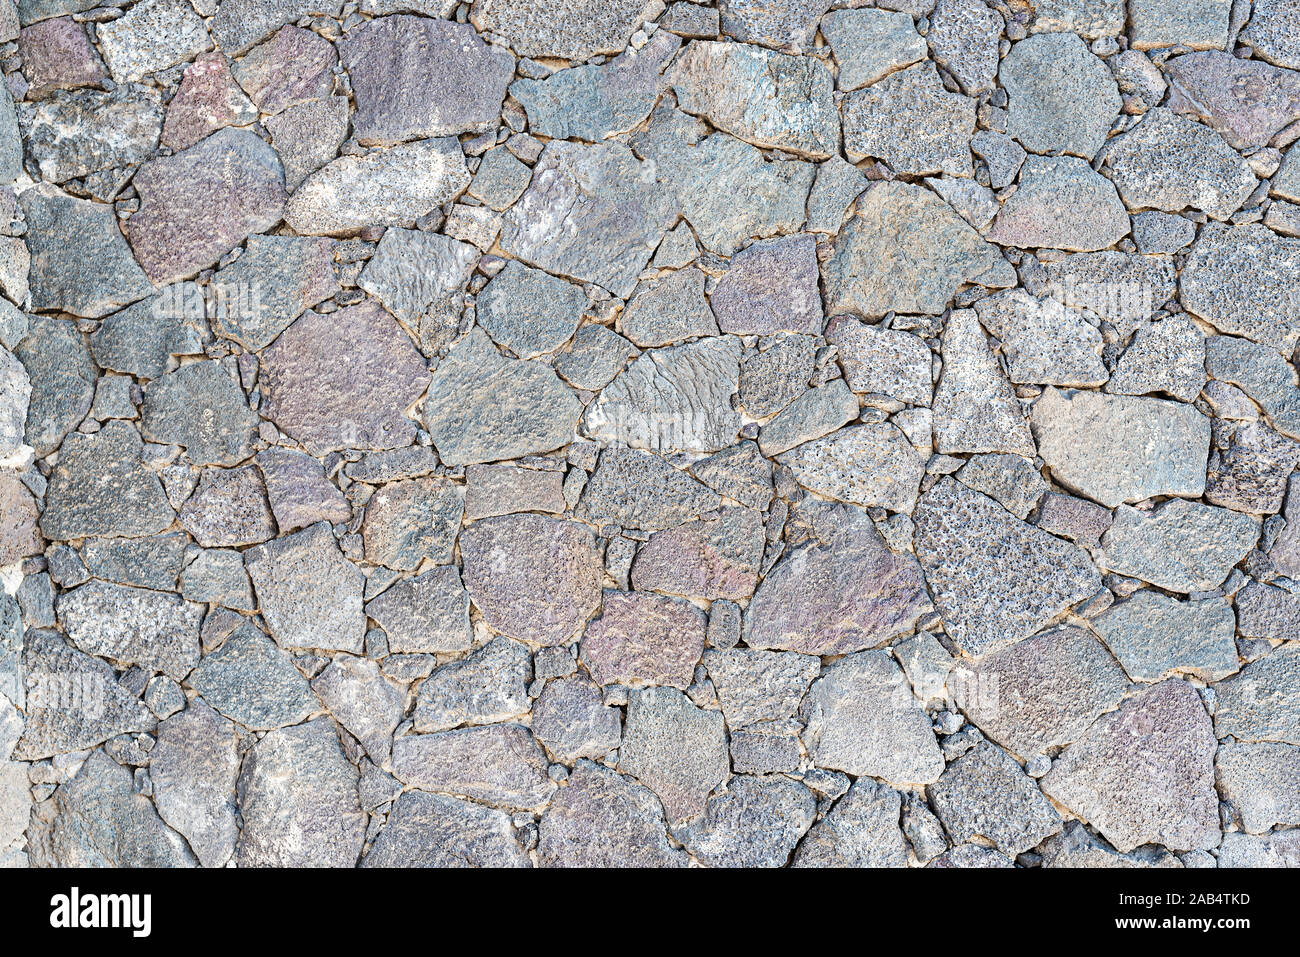 full-frame close-up of uneven dry stone wall background Stock Photo